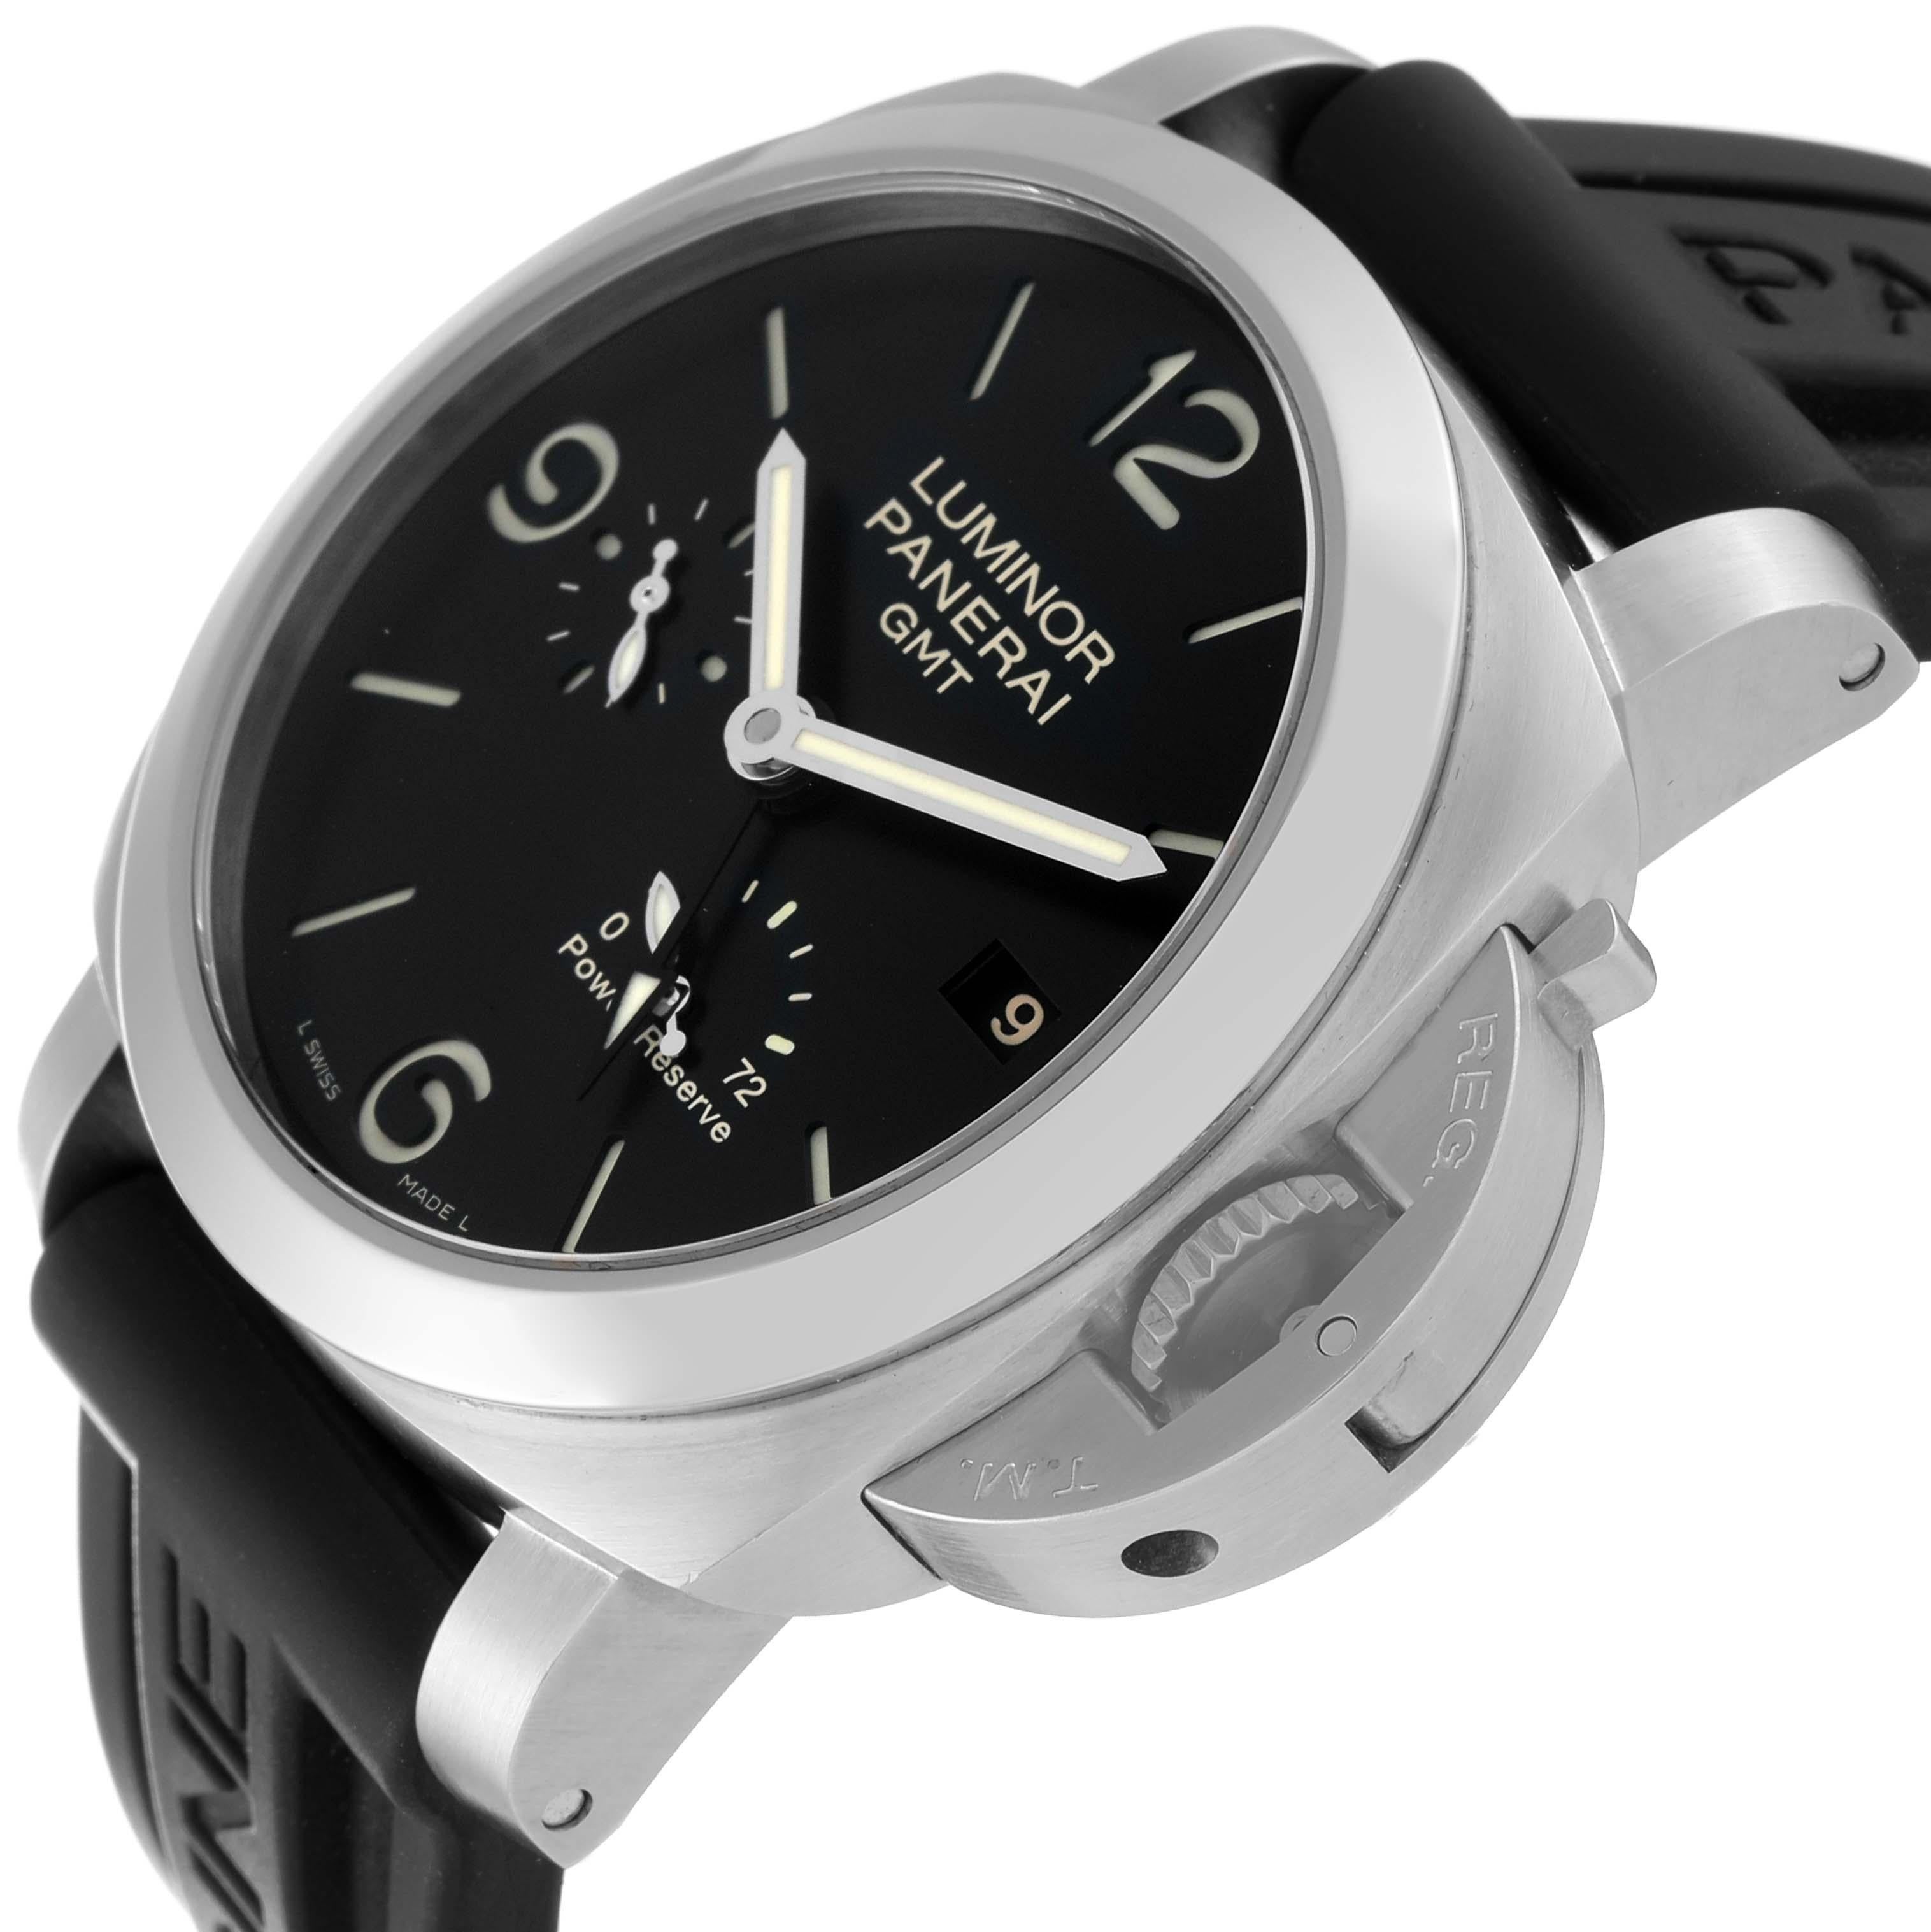 Panerai Luminor GMT 1950 3 Days Power Reserve Steel Watch PAM00321 Box Papers In Excellent Condition For Sale In Atlanta, GA